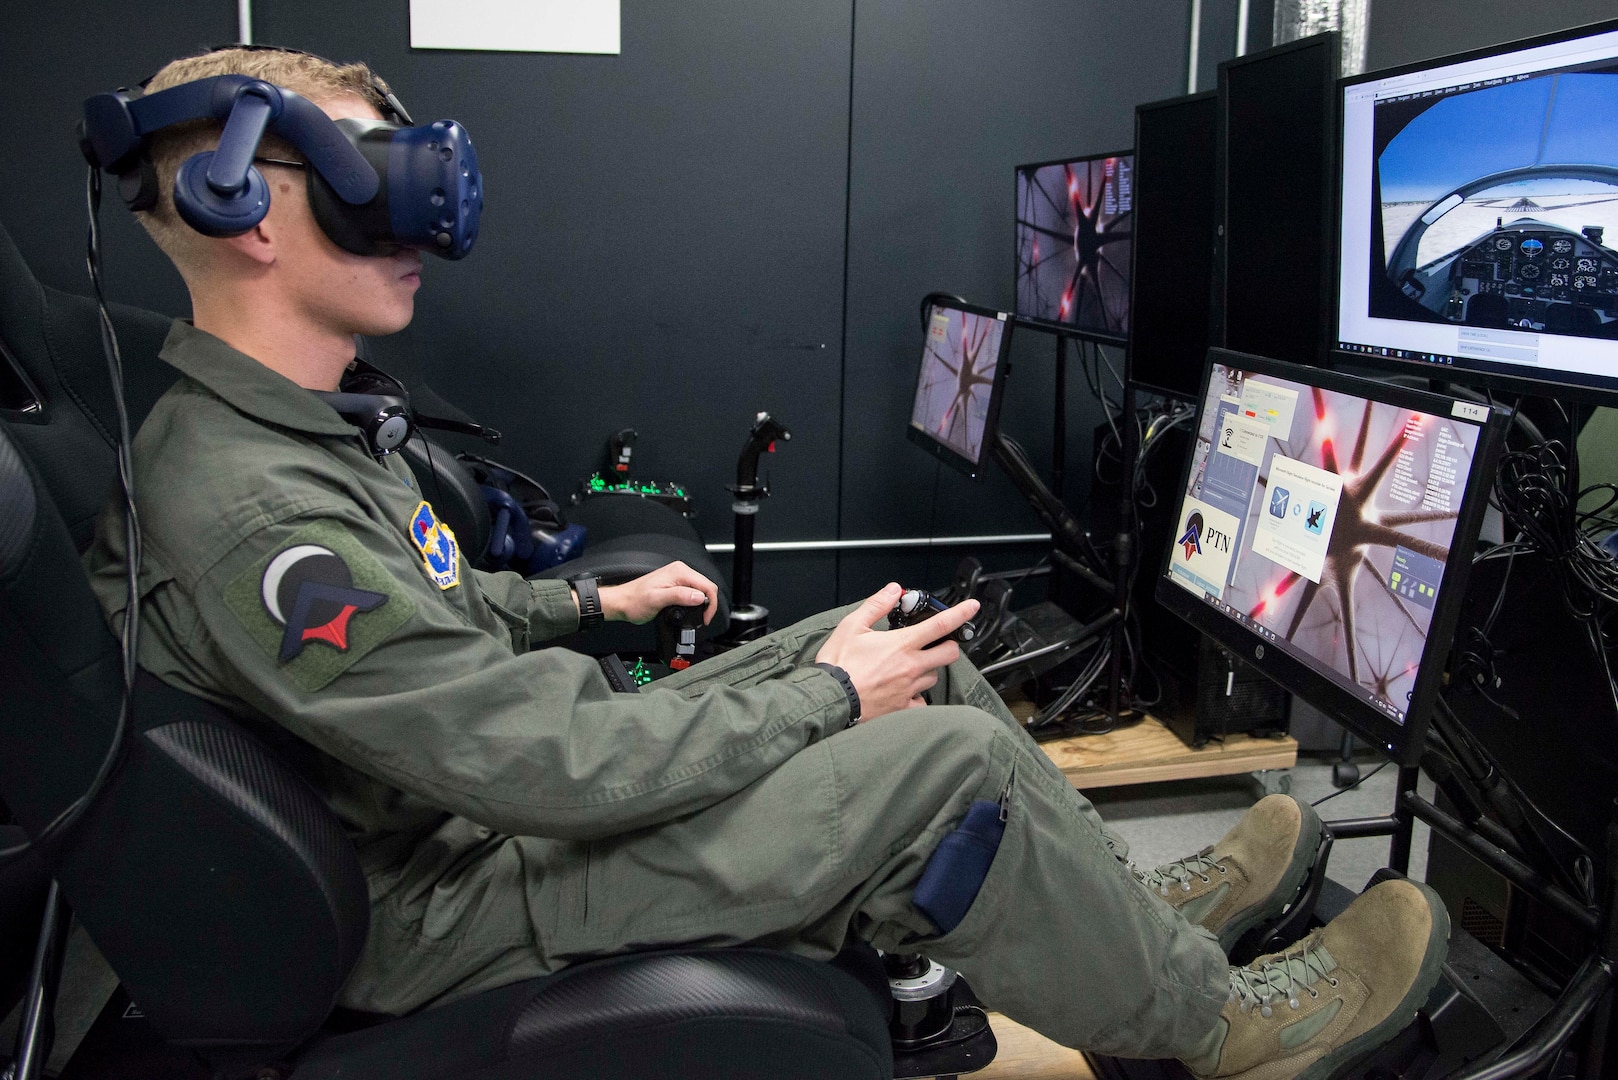 Airman First Class Shane Stewart, Pilot Training Next student, trains on a virtual reality flight simulator at the Armed Forces Reserve Center in Austin, Texas, Feb. 5, 2019. The instruction in this second version is shaped from the success of and lessons learned from the first PTN program, where 13 officers graduated in June 2018 and progressed to advanced training across multiple platforms. (U.S. Air Force photo by Sean M. Worrell)